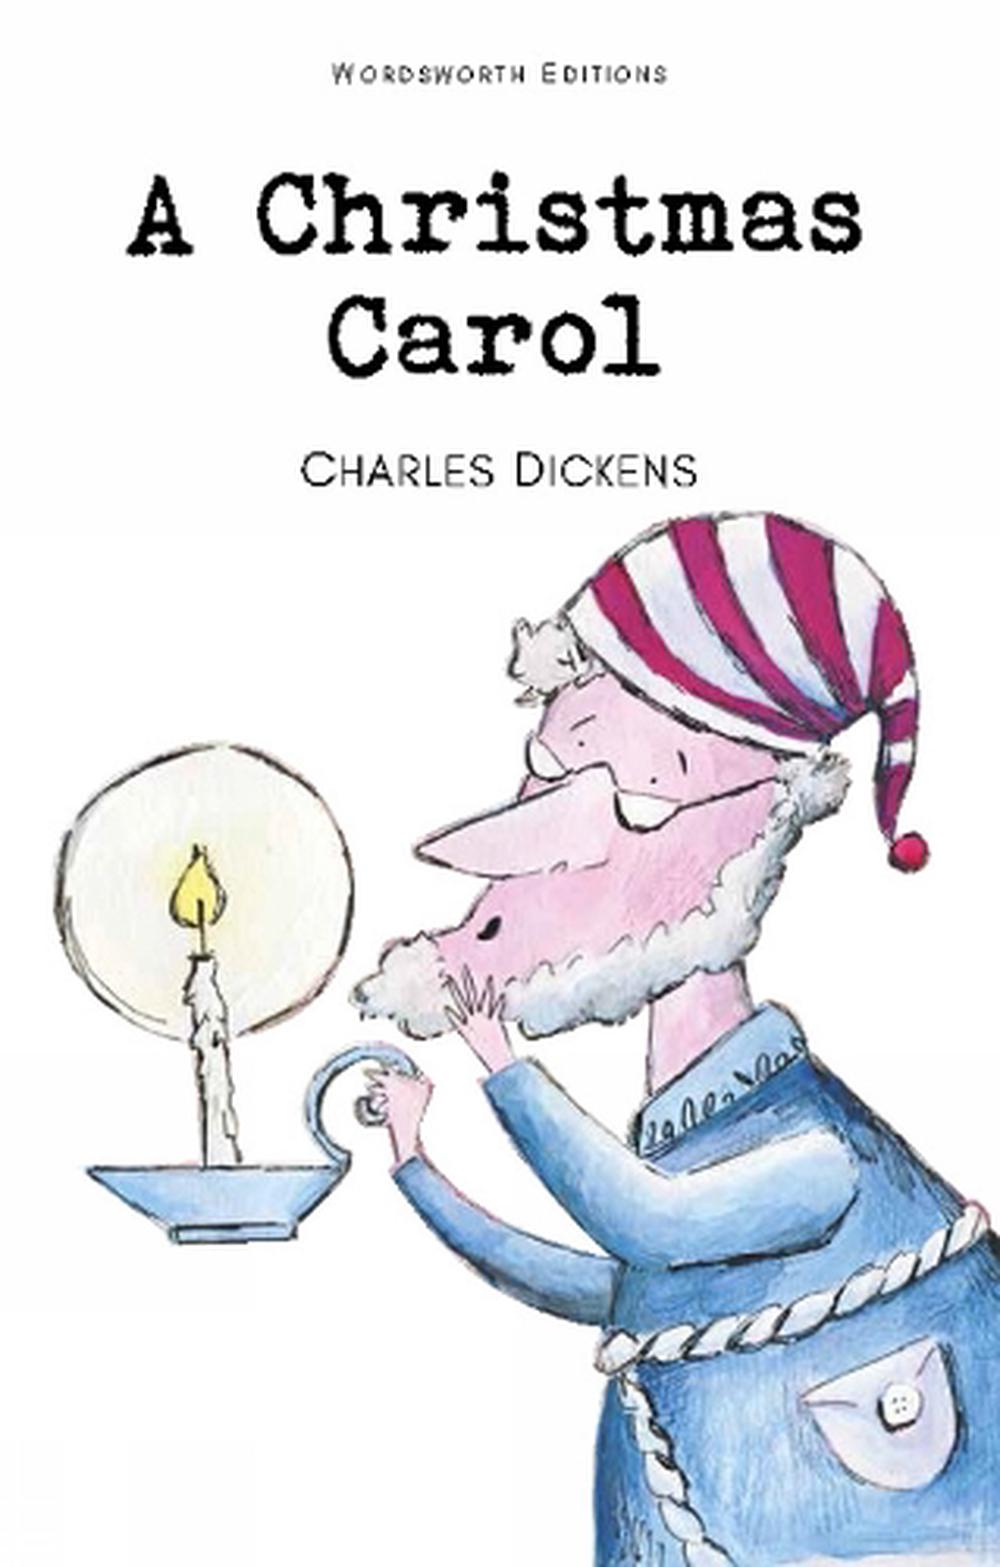 A Christmas Carol by Charles Dickens Paperback Book Free Shipping! 9781853261213 | eBay